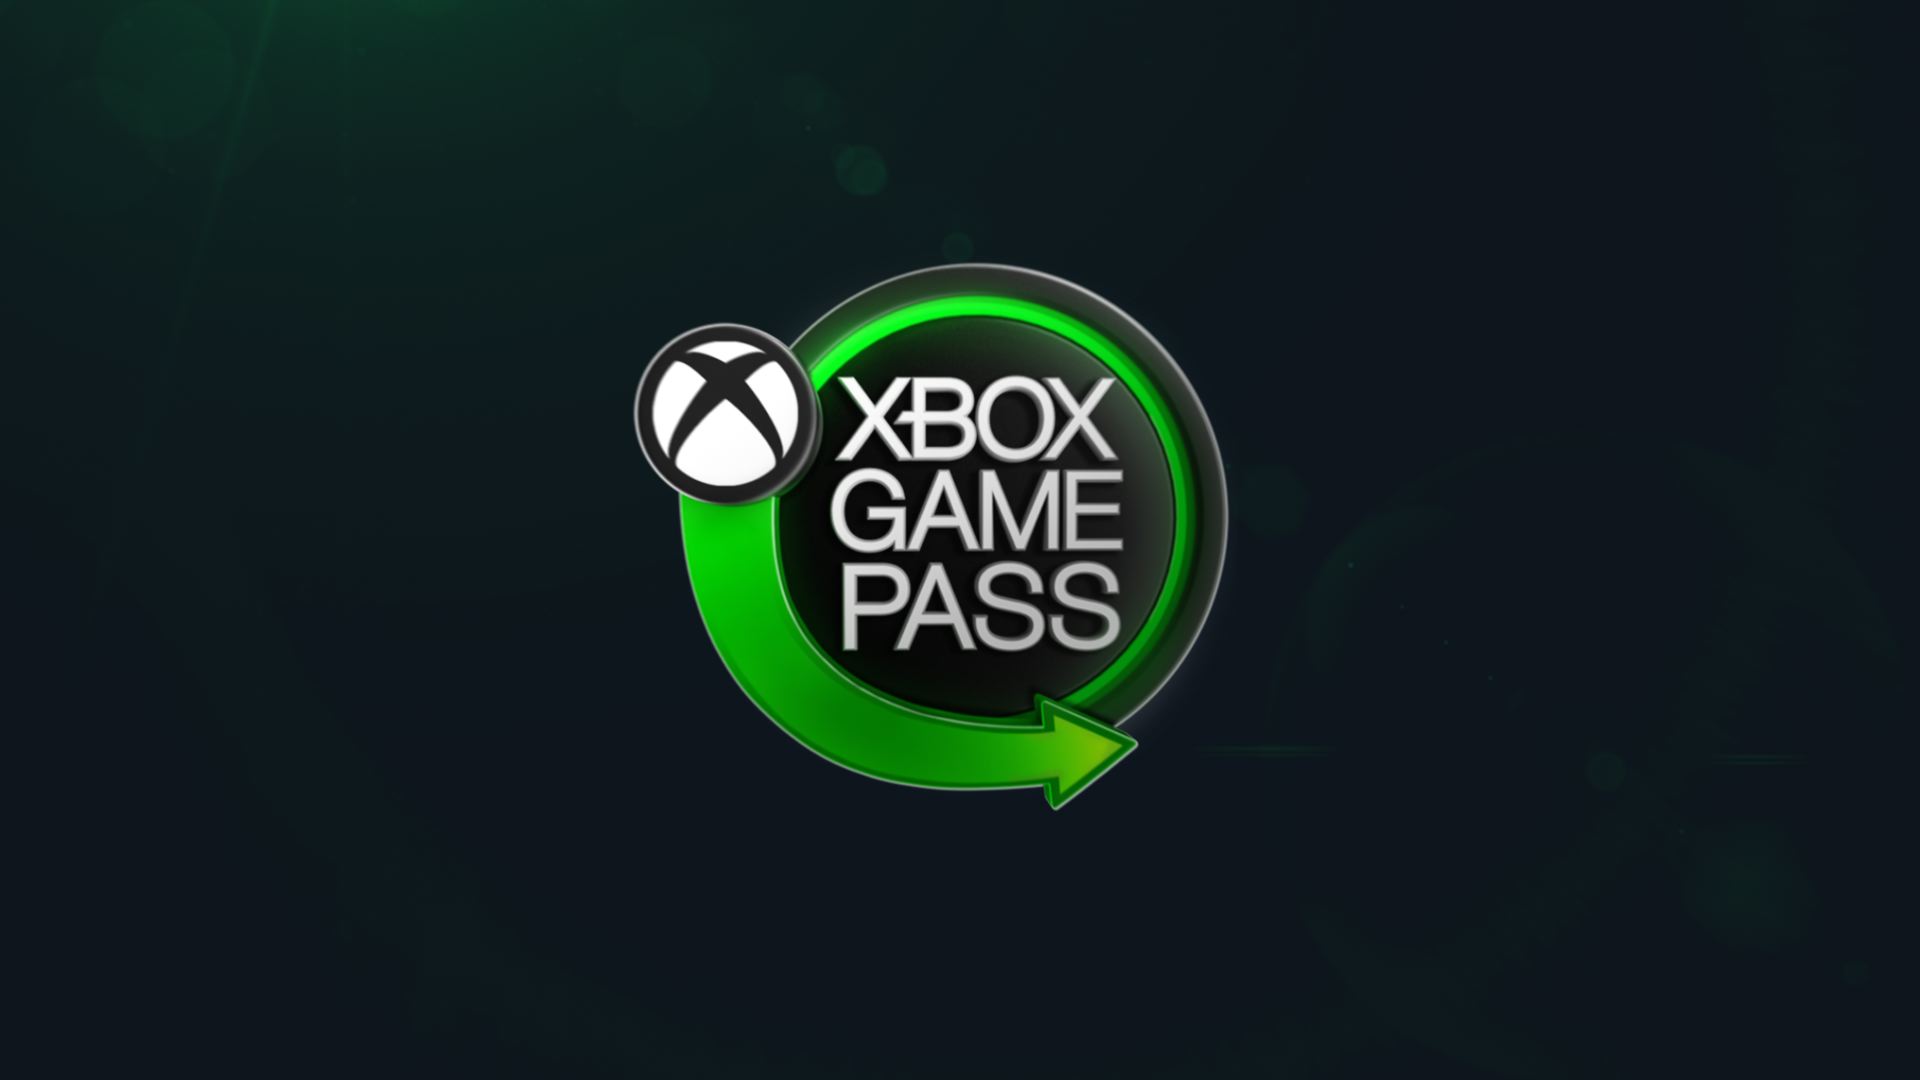 Coming Soon to Xbox Game Pass: Final Fantasy XII, Project Winter, Jurassic  World Evolution, and More - Xbox Wire